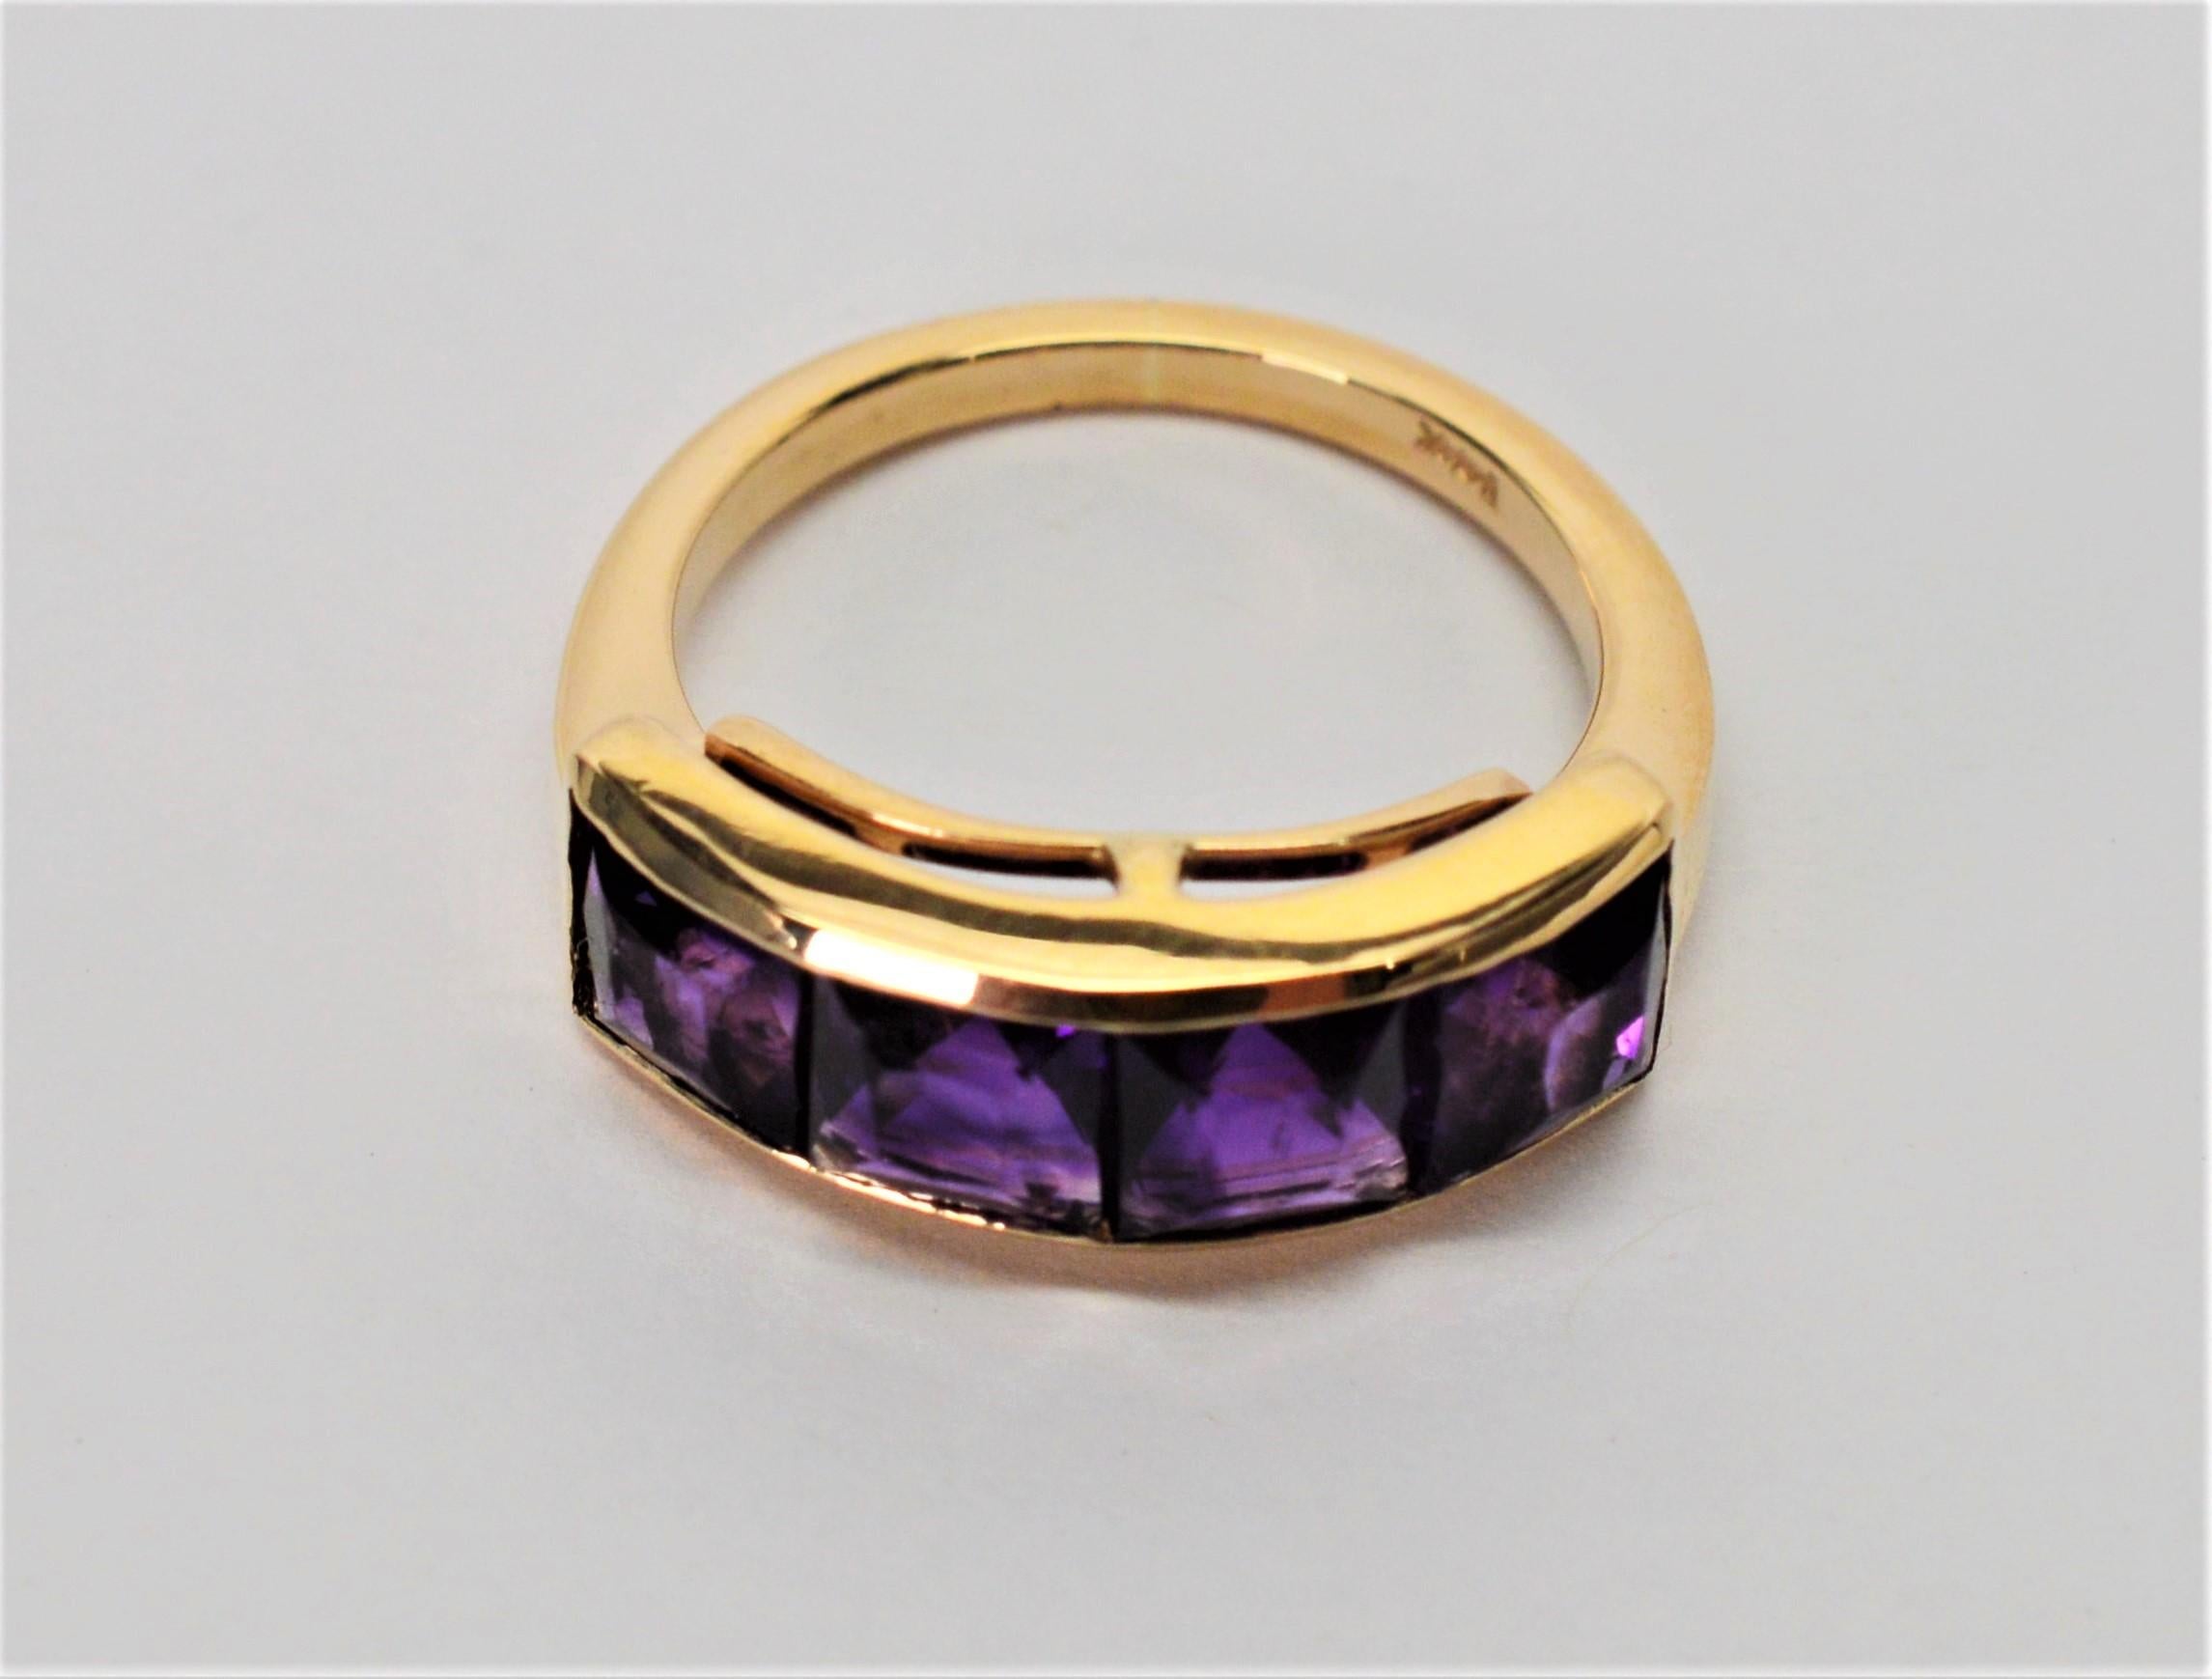 Four vivid deep purple 5 x 5 mm natural amethyst stones face this fourteen karat (14K) yellow gold band in ring size 5. With a total weight of two carats (2 carats TW), the emerald cut amethysts wrap with warmth and elegance. 
 